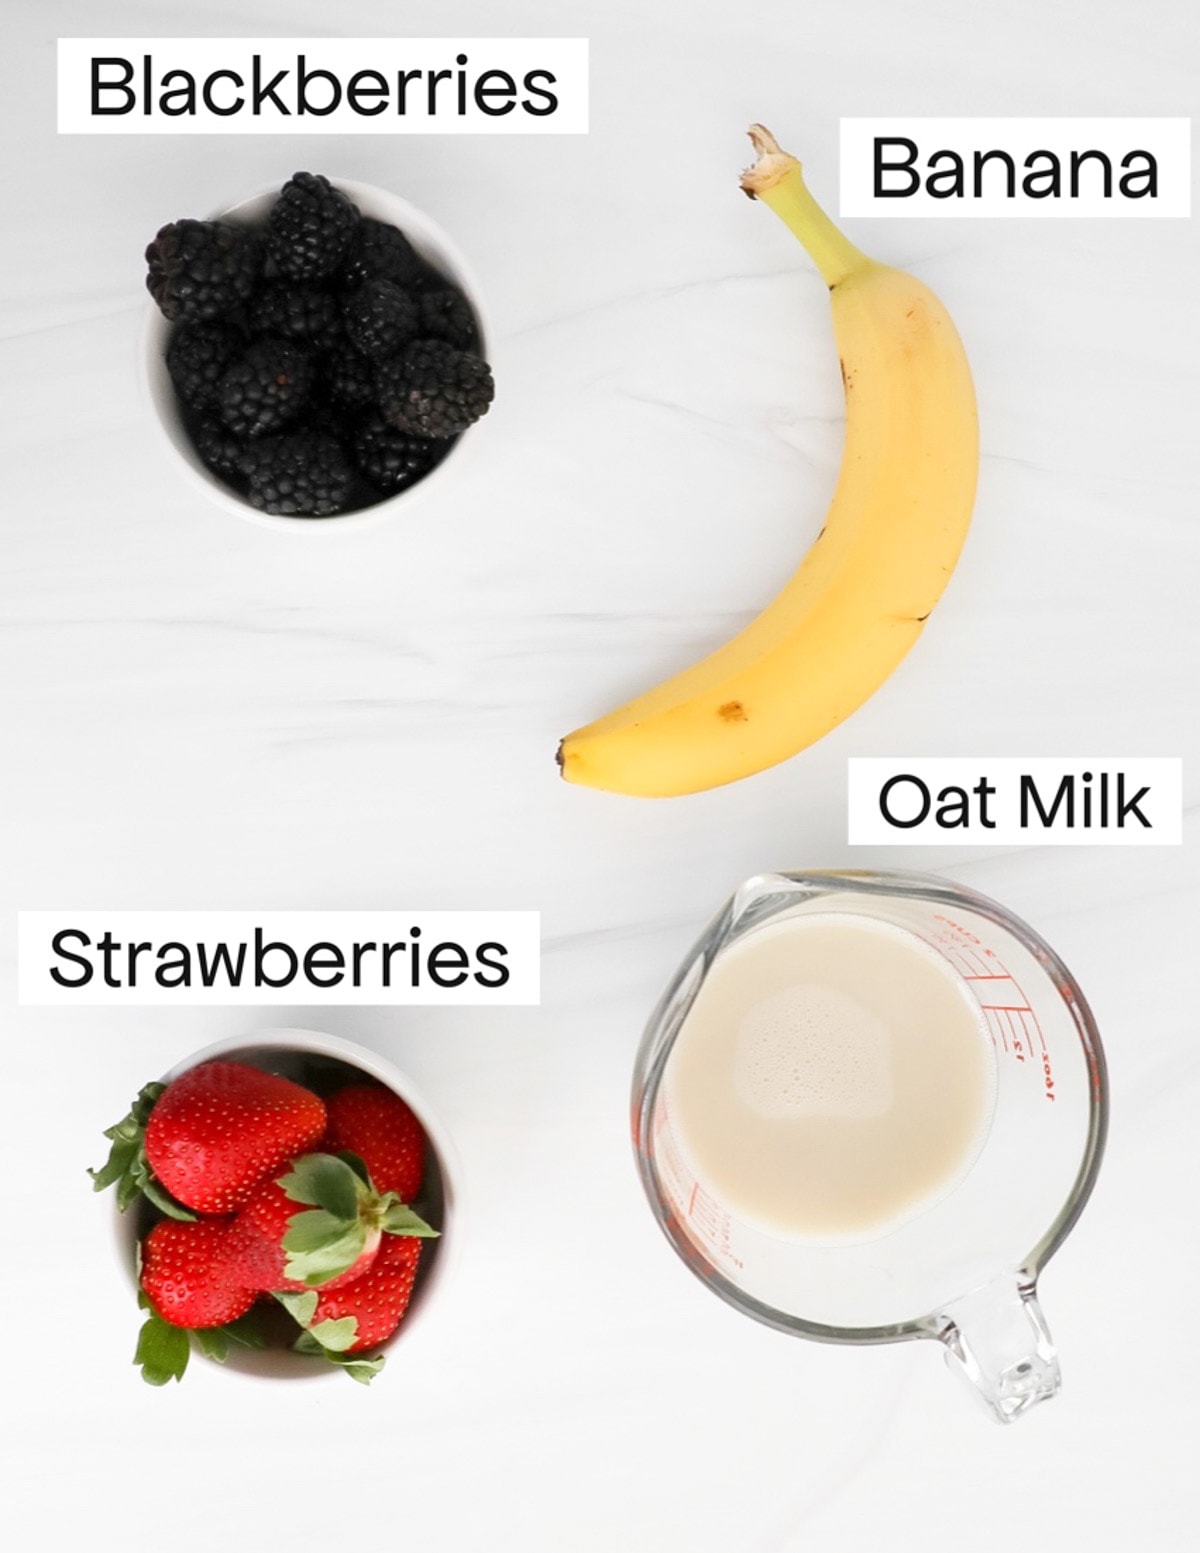 Labeled ingredients including blackberries, a banana, strawberries, and a measuring cup filled with oat milk.